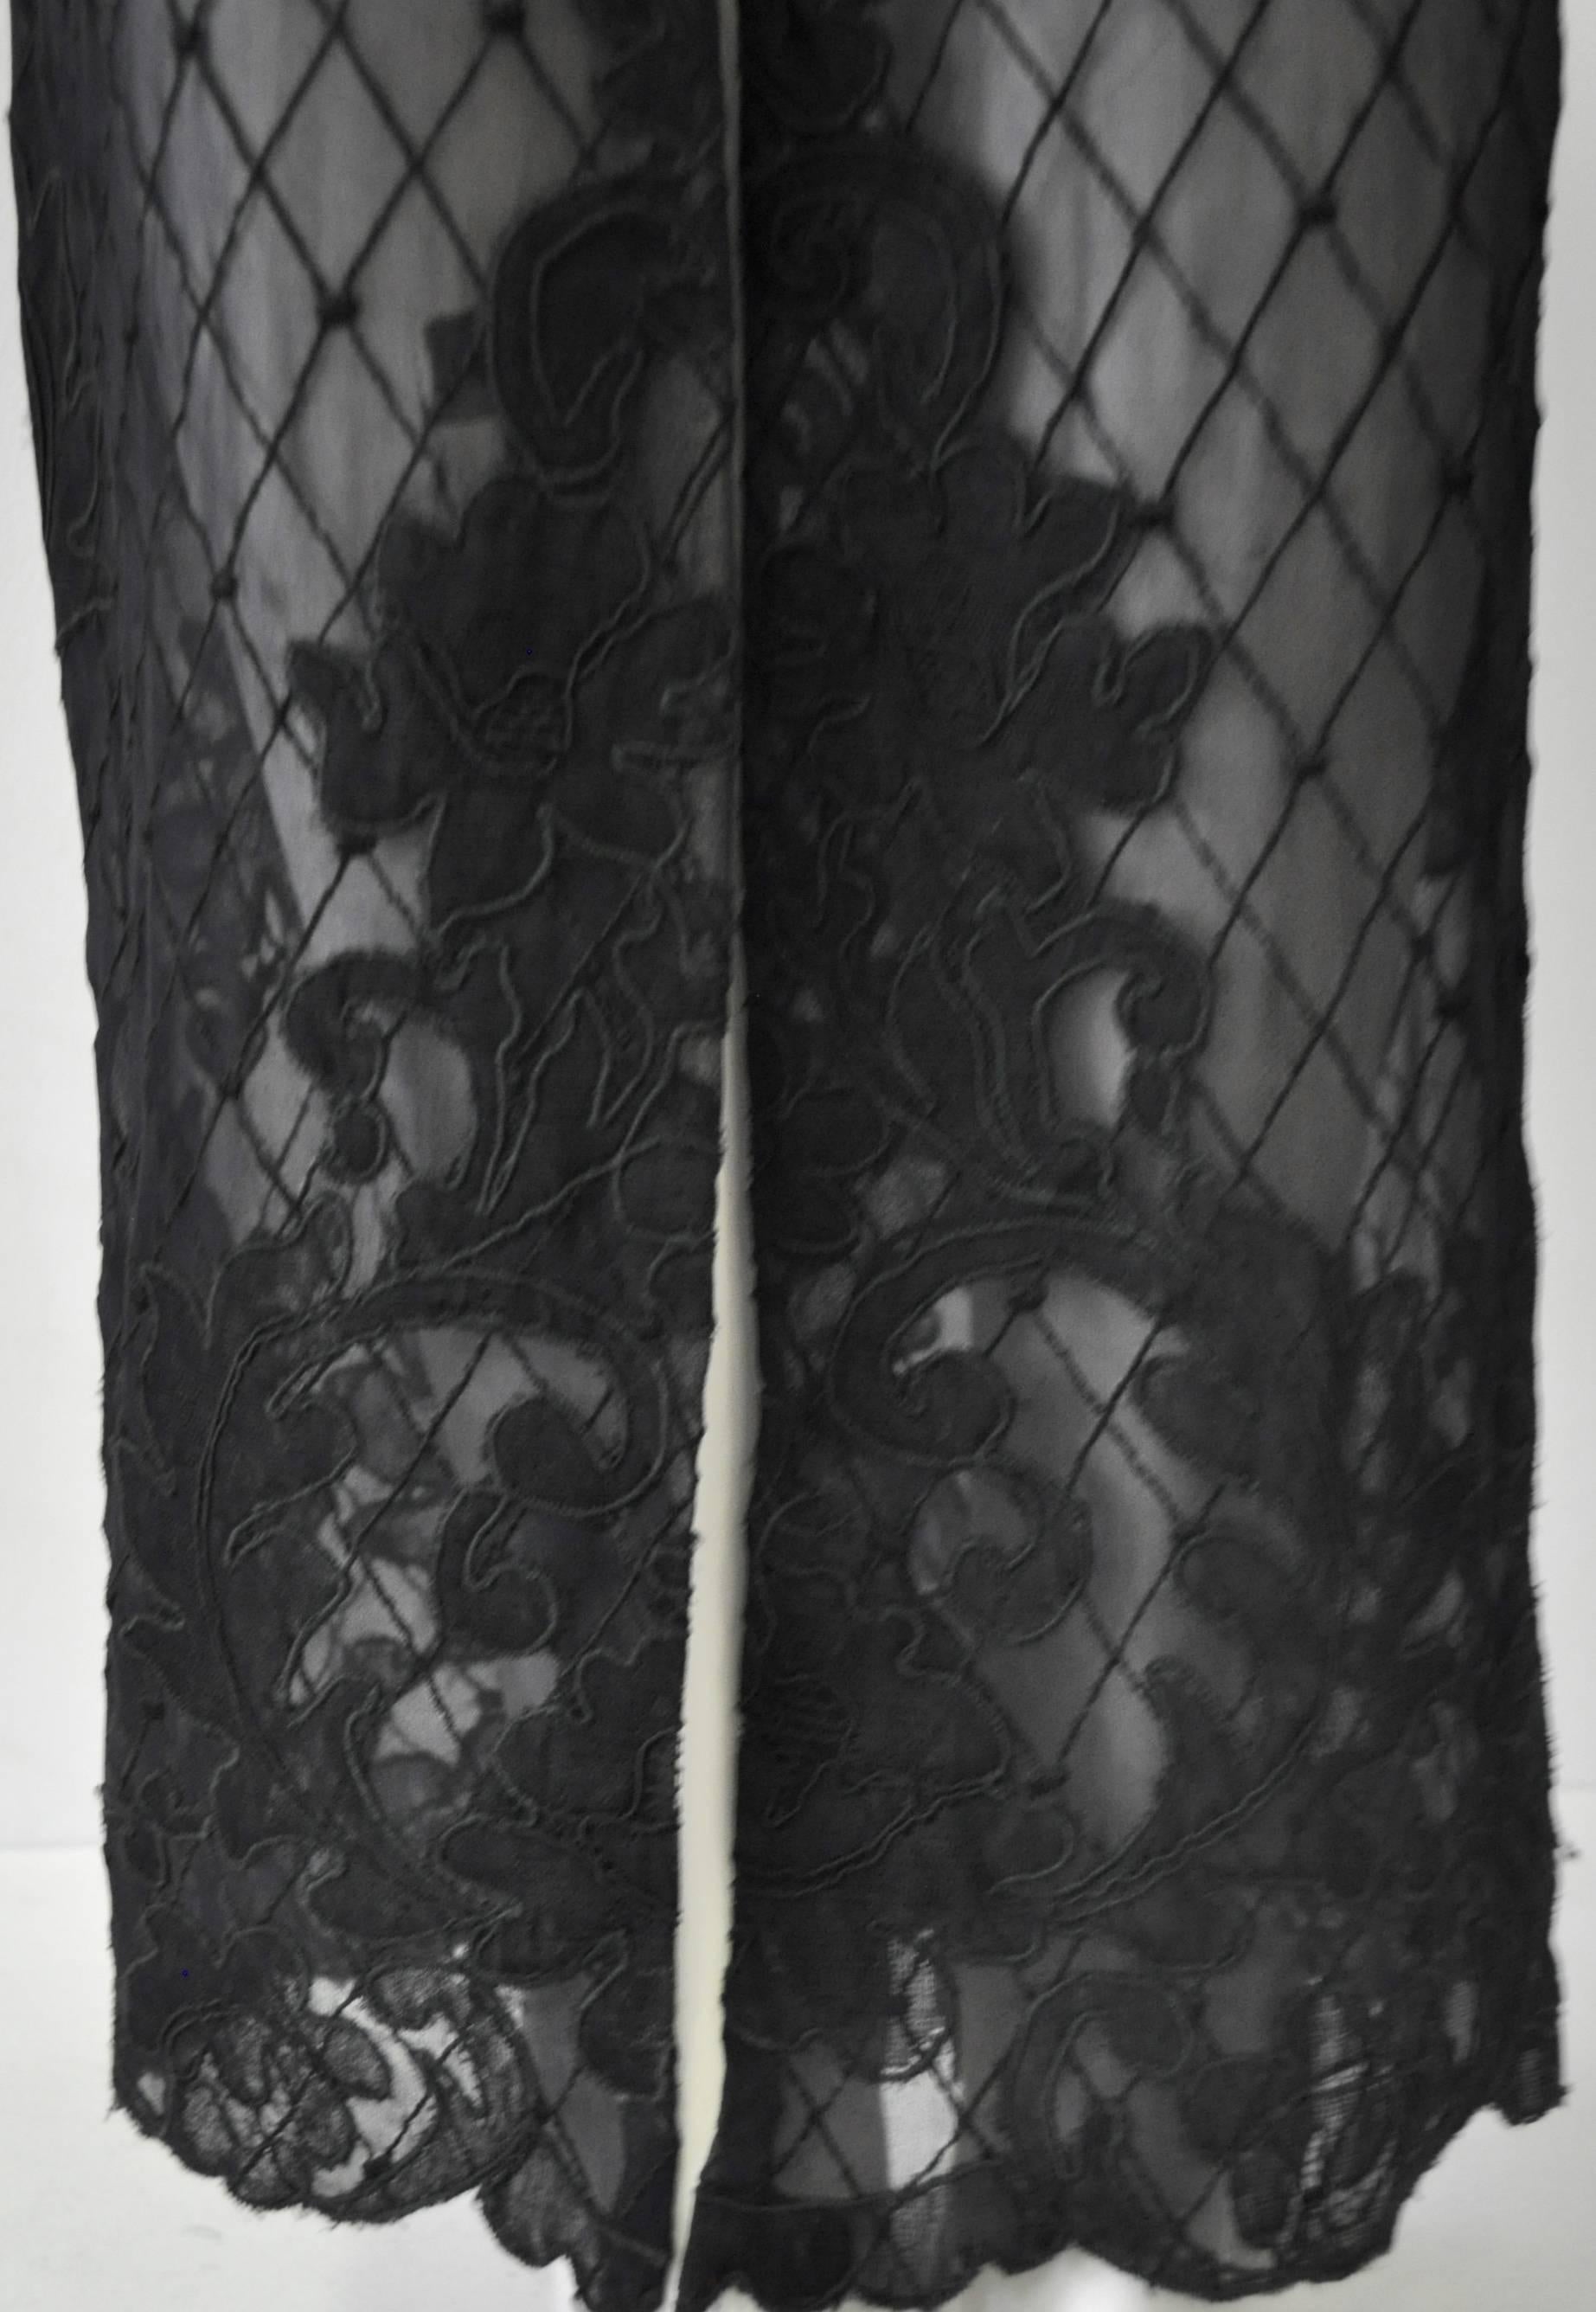 Sensational Gianni Versace Couture Netted Silk Floral Lace Hem Maxi Skirt For Sale 1